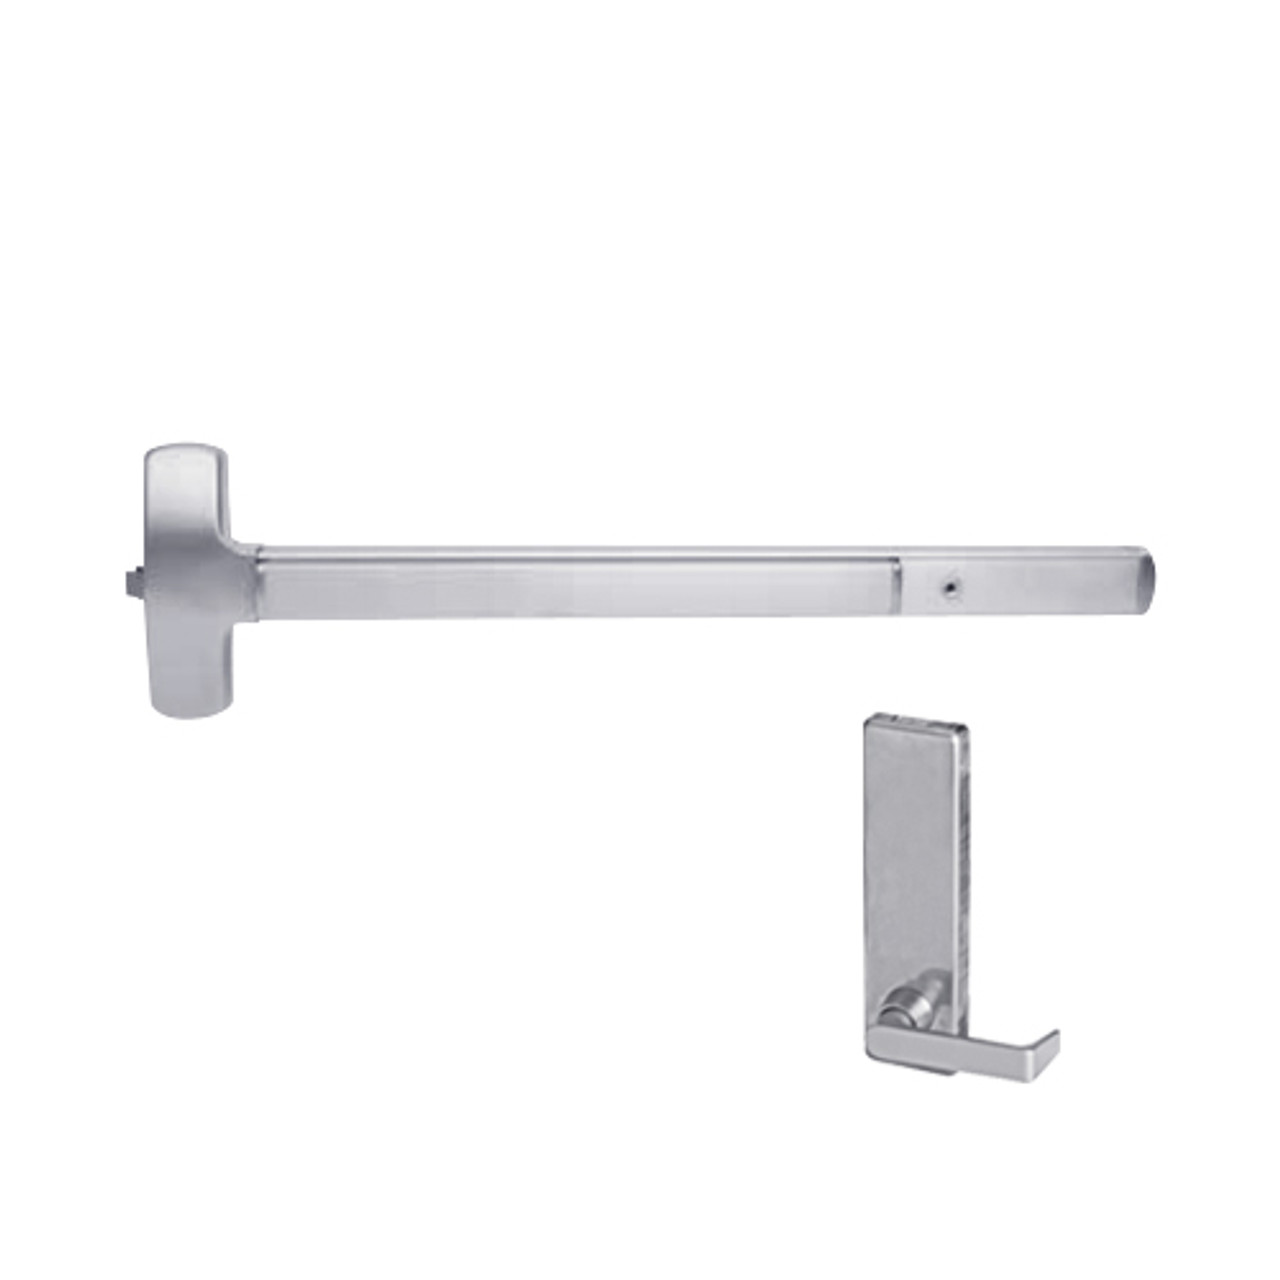 25-R-L-BE-DANE-US32-3-RHR Falcon Exit Device in Polished Stainless Steel